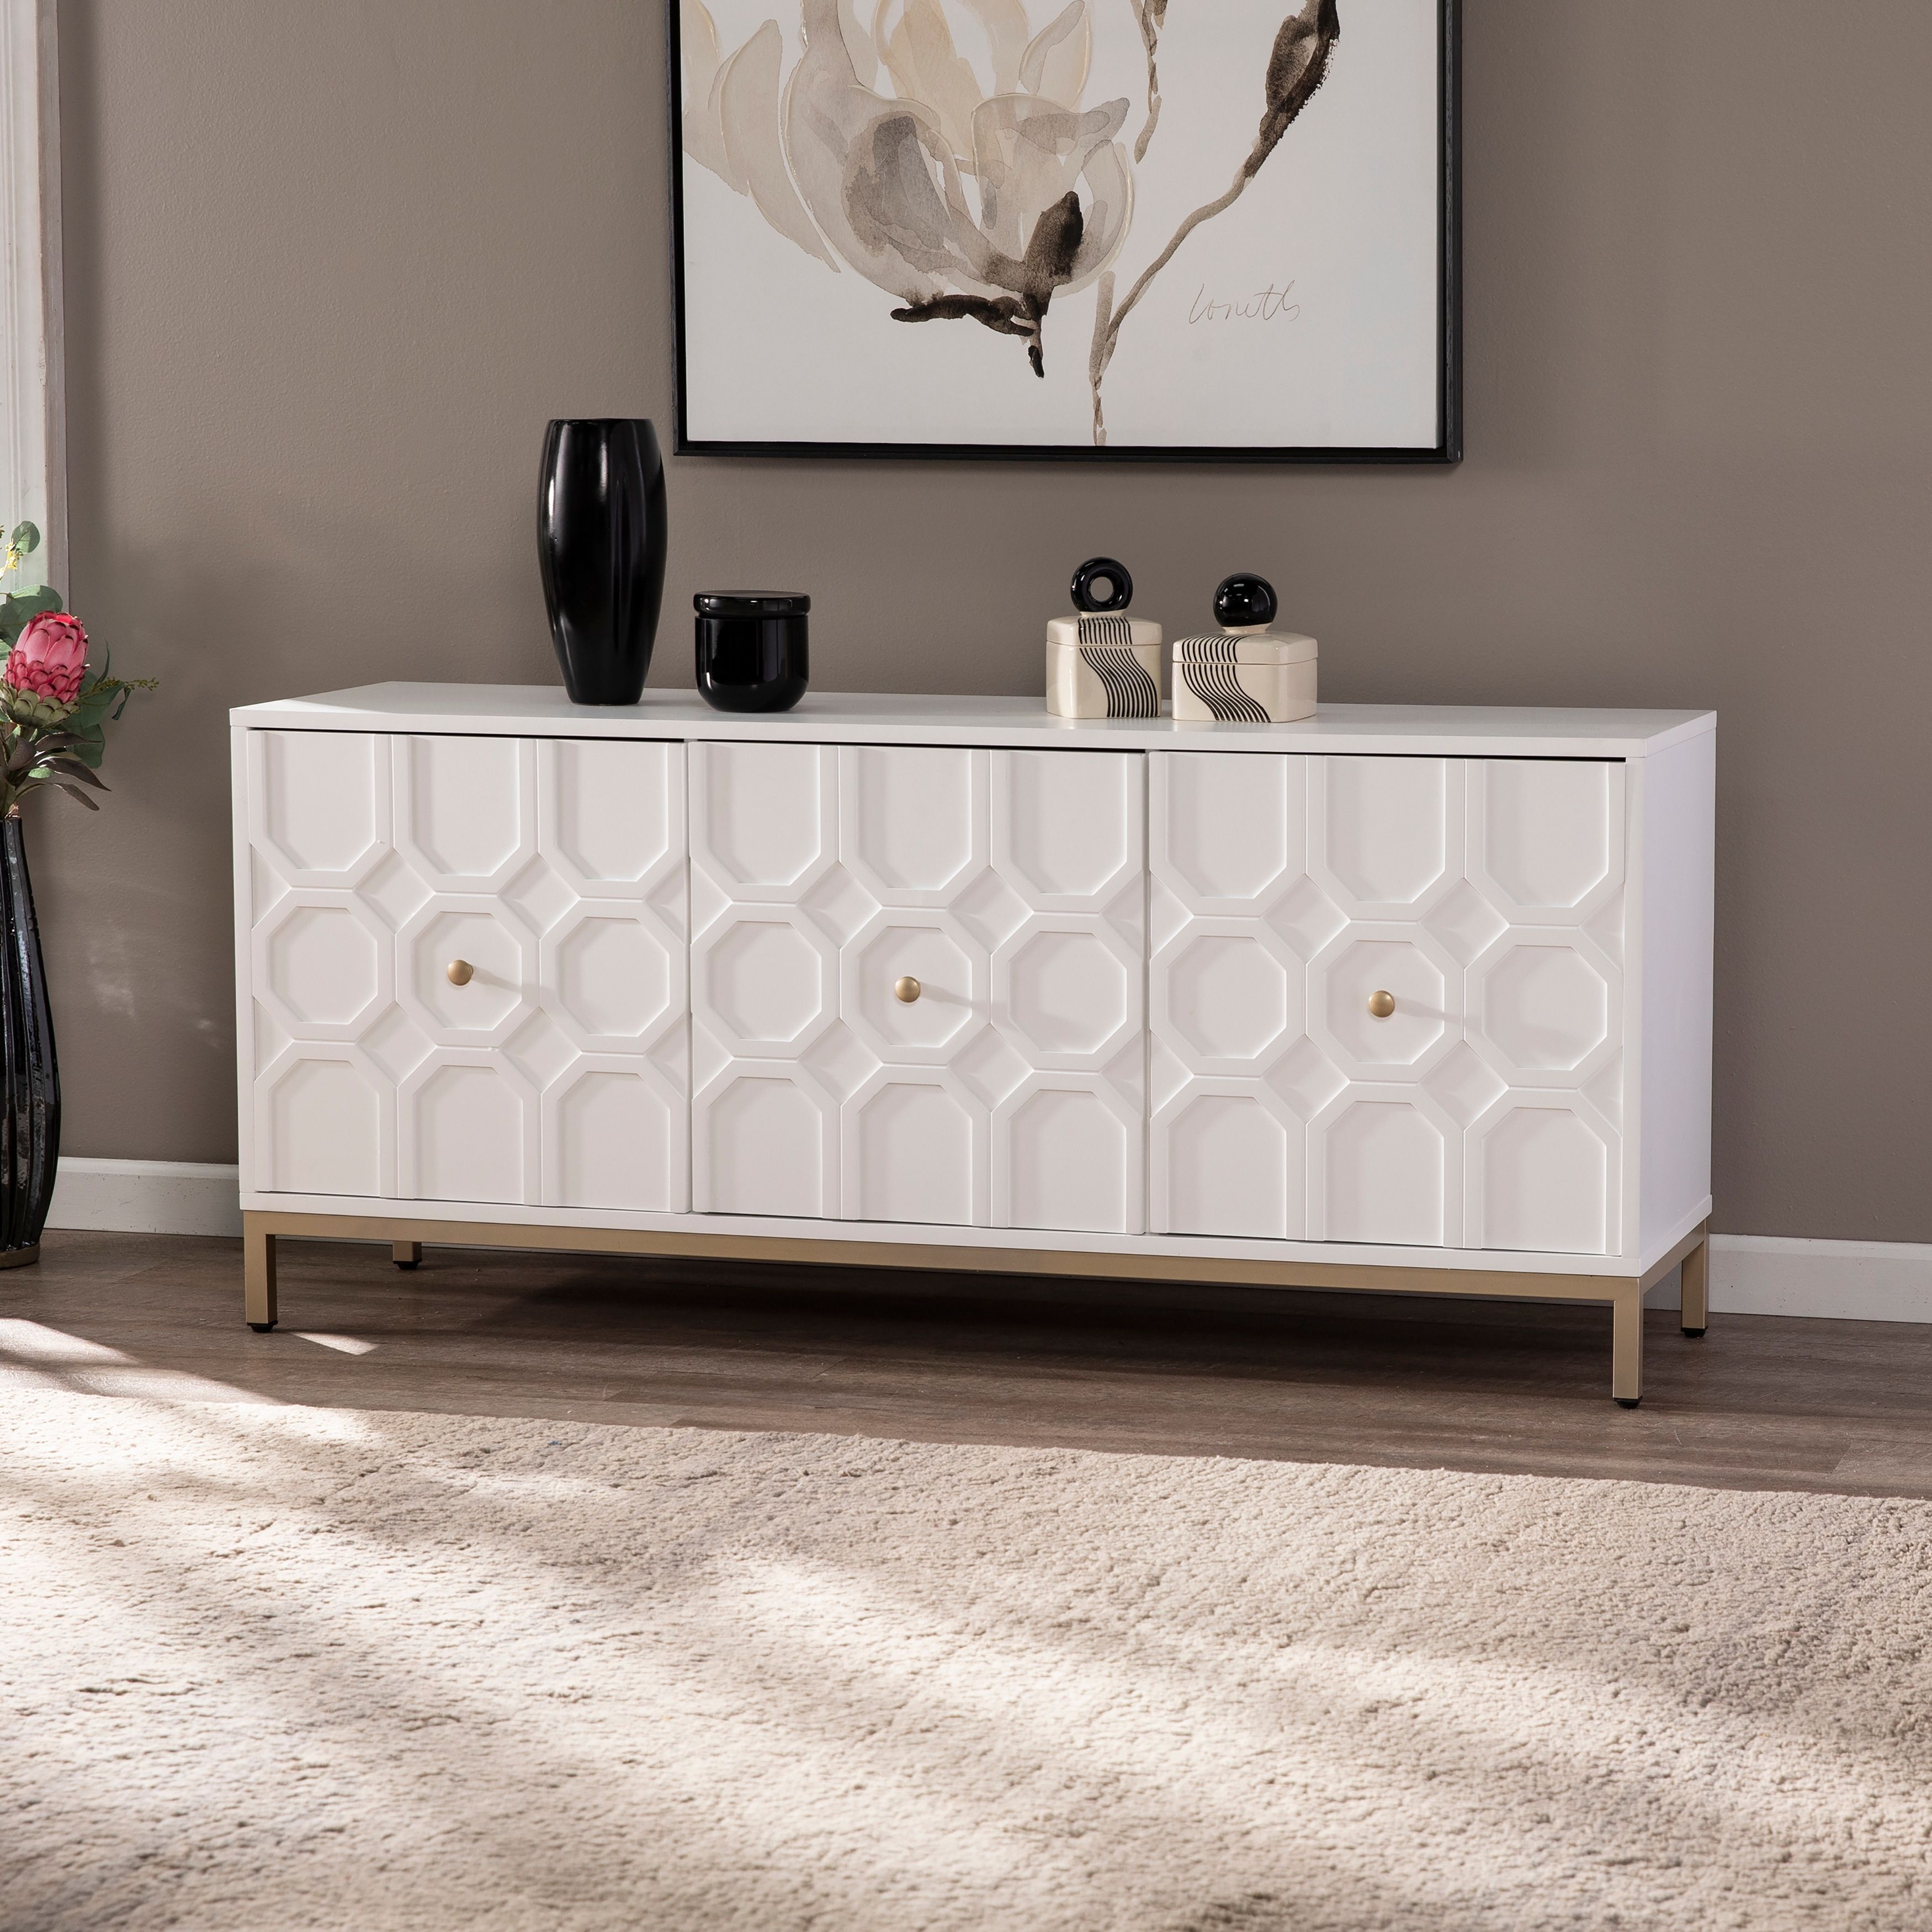 Sei Furniture Gliday Contemporary White Wood 3 Door Buffet Sideboard Accent  Cabinet – On Sale – Bed Bath & Beyond – 30217877 With Sideboards Accent Cabinet (View 2 of 15)